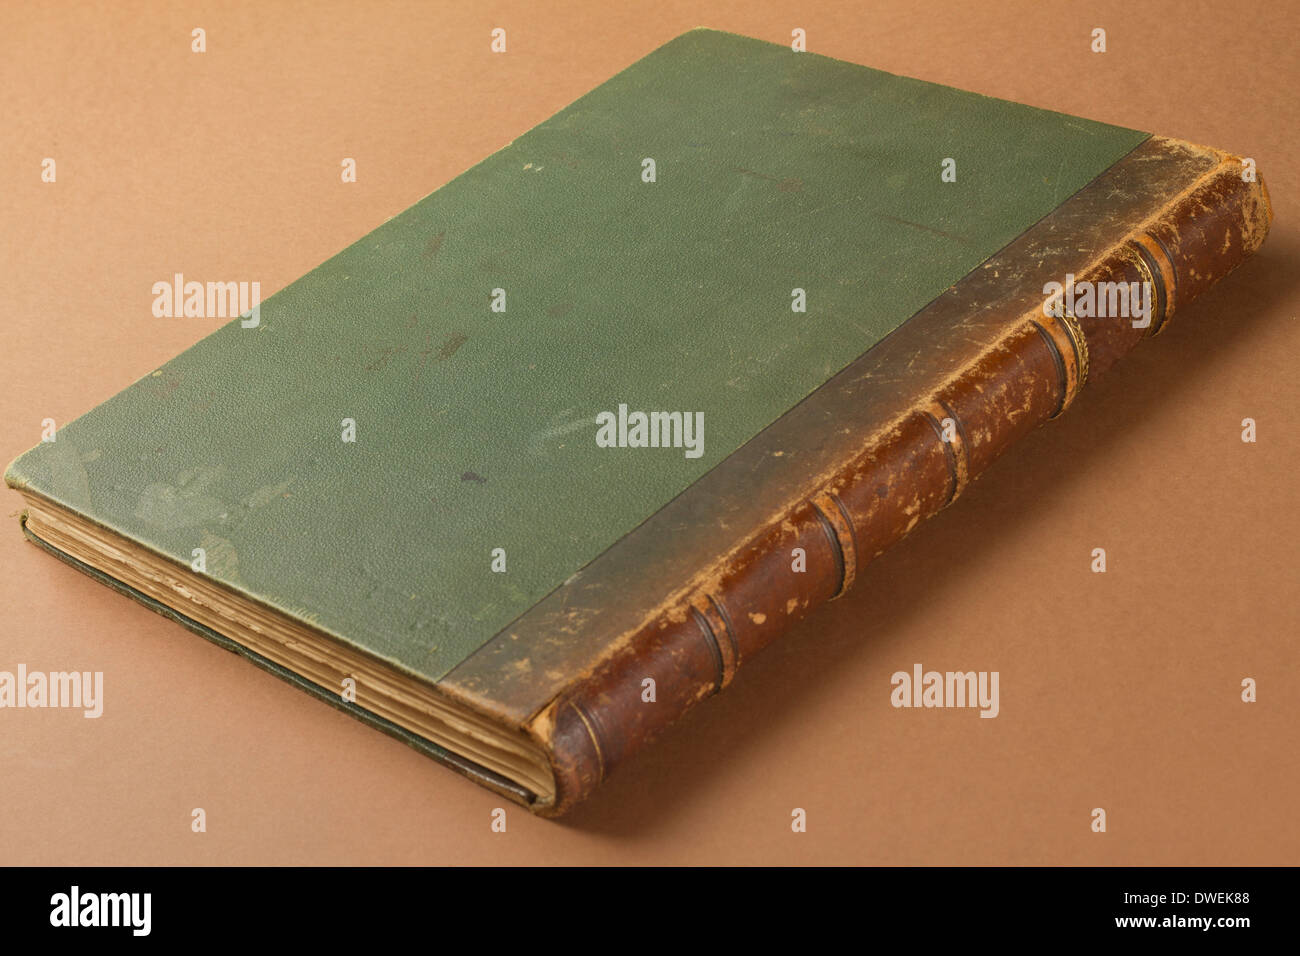 Antique leather book cover background. Stock Photo